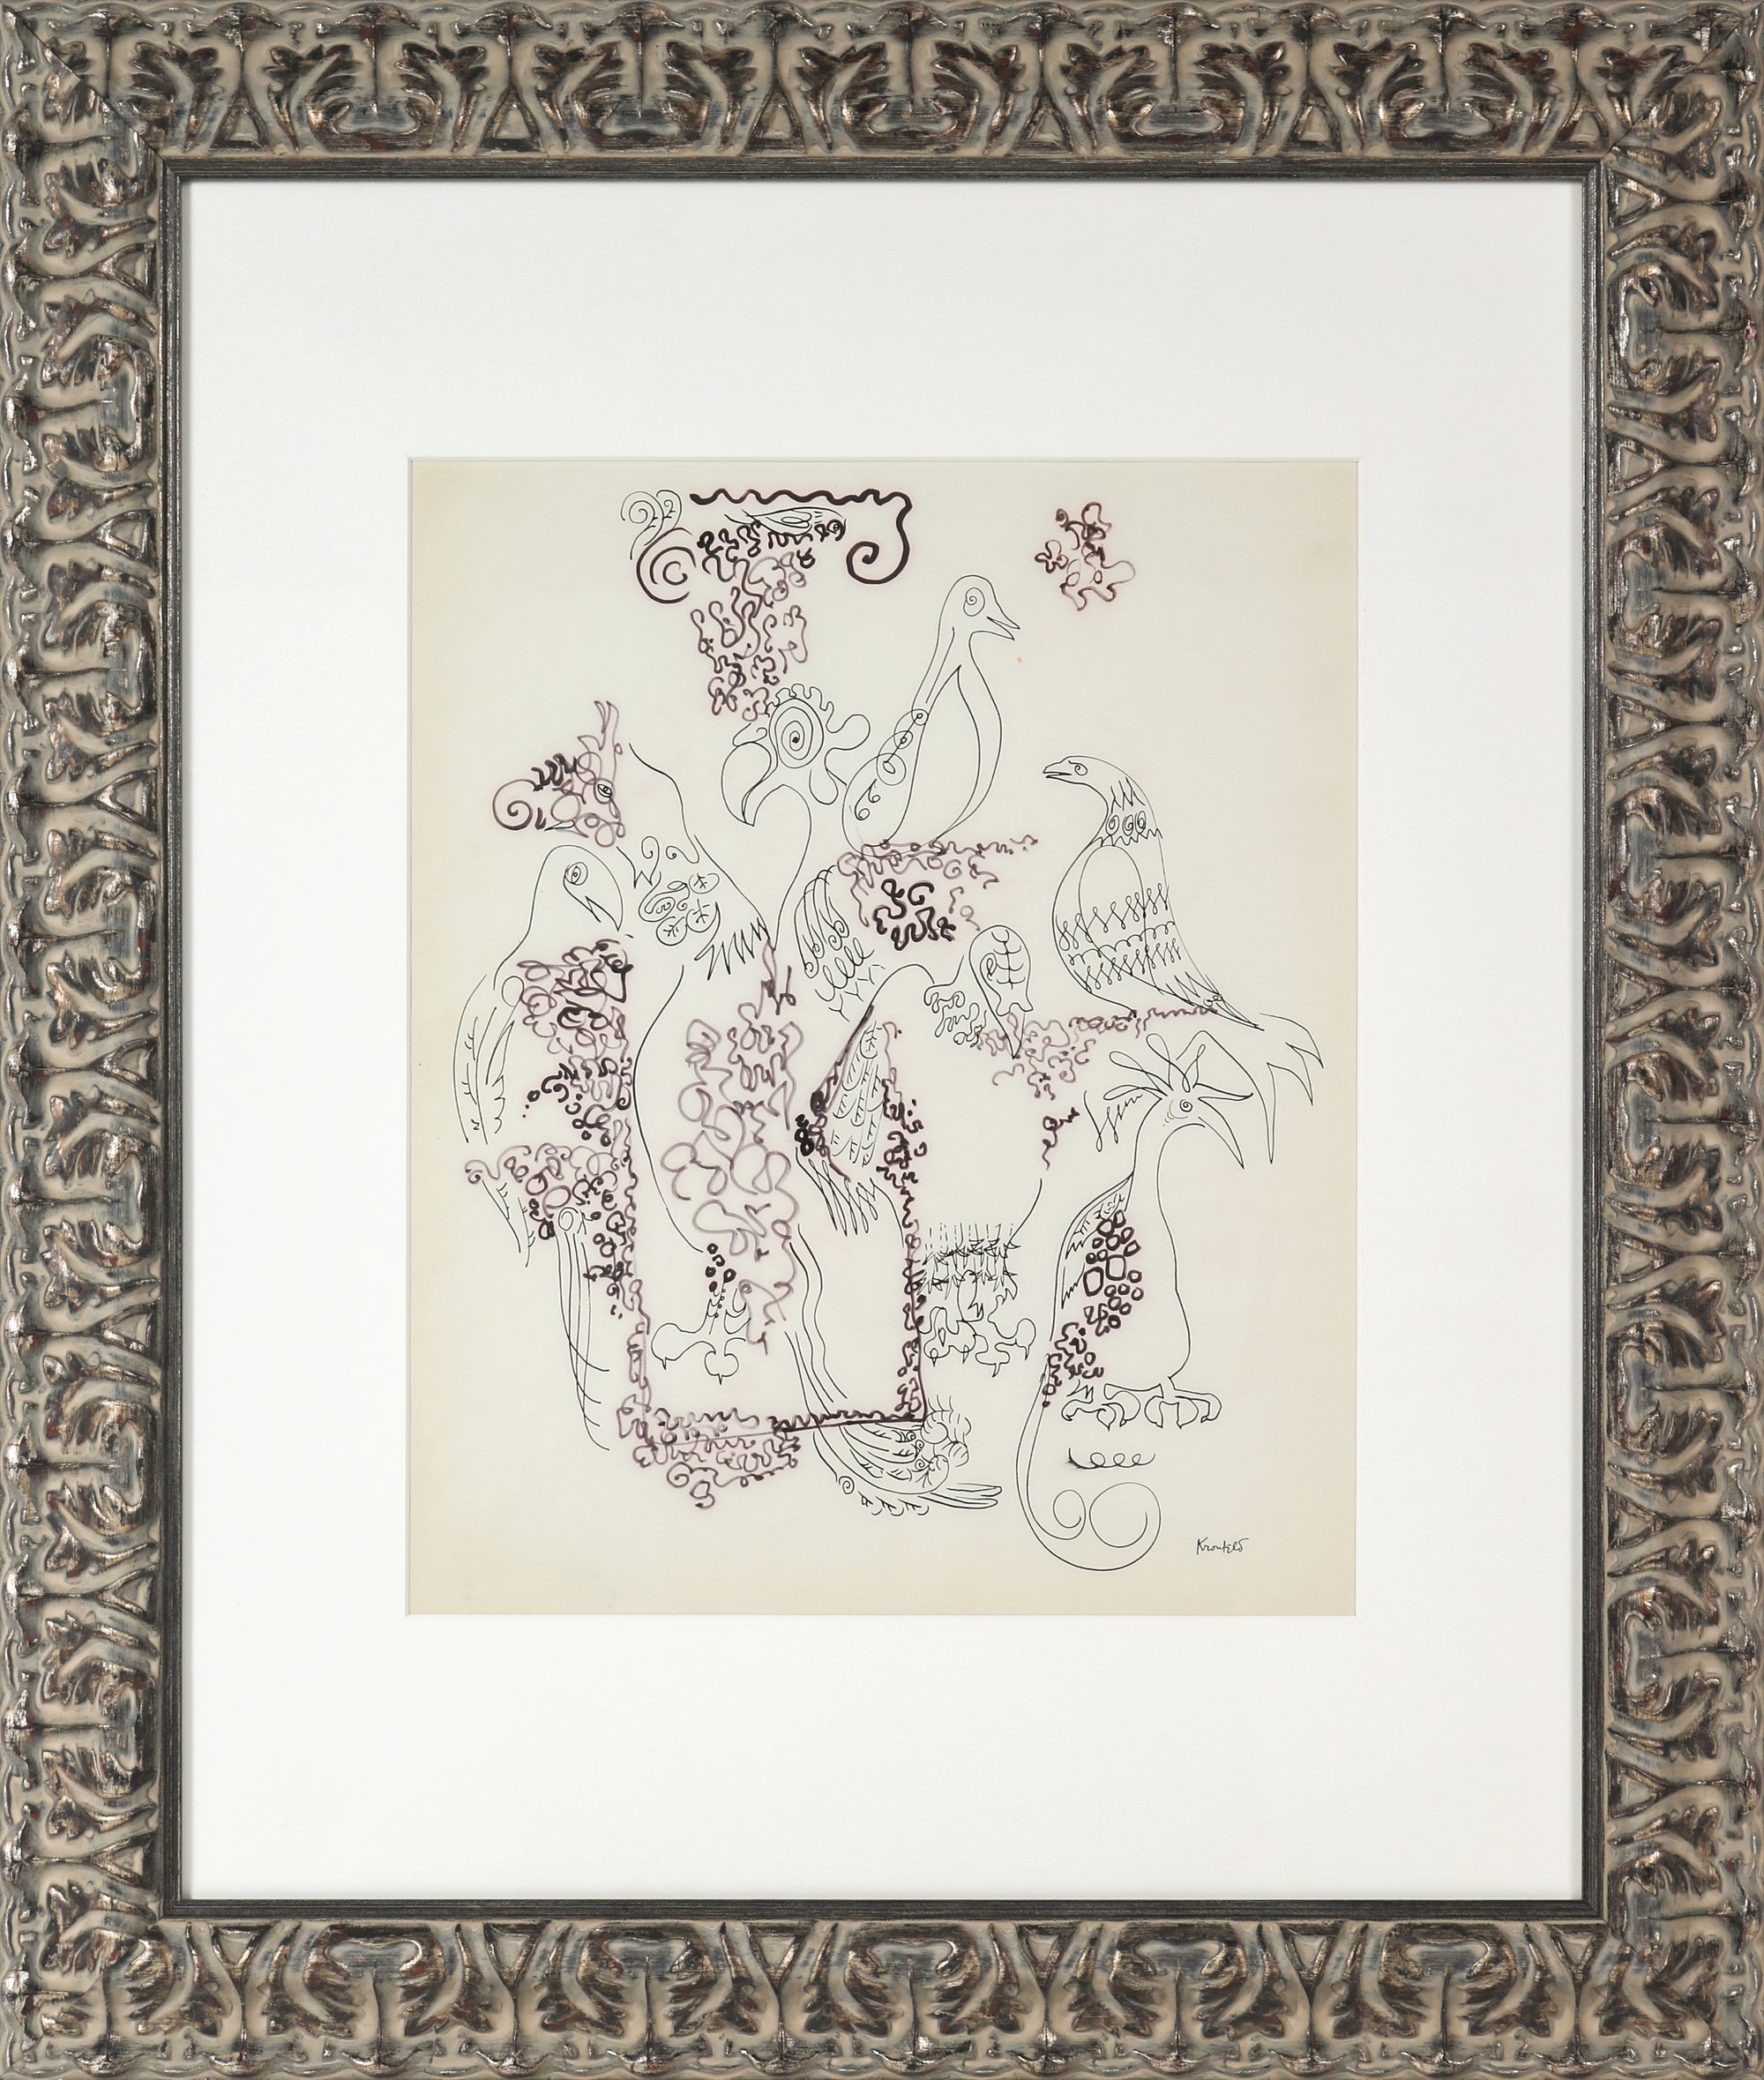 Intricate Floral Modernist Drawing <br>1960-80s Ink on Paper <br><br>#A9678